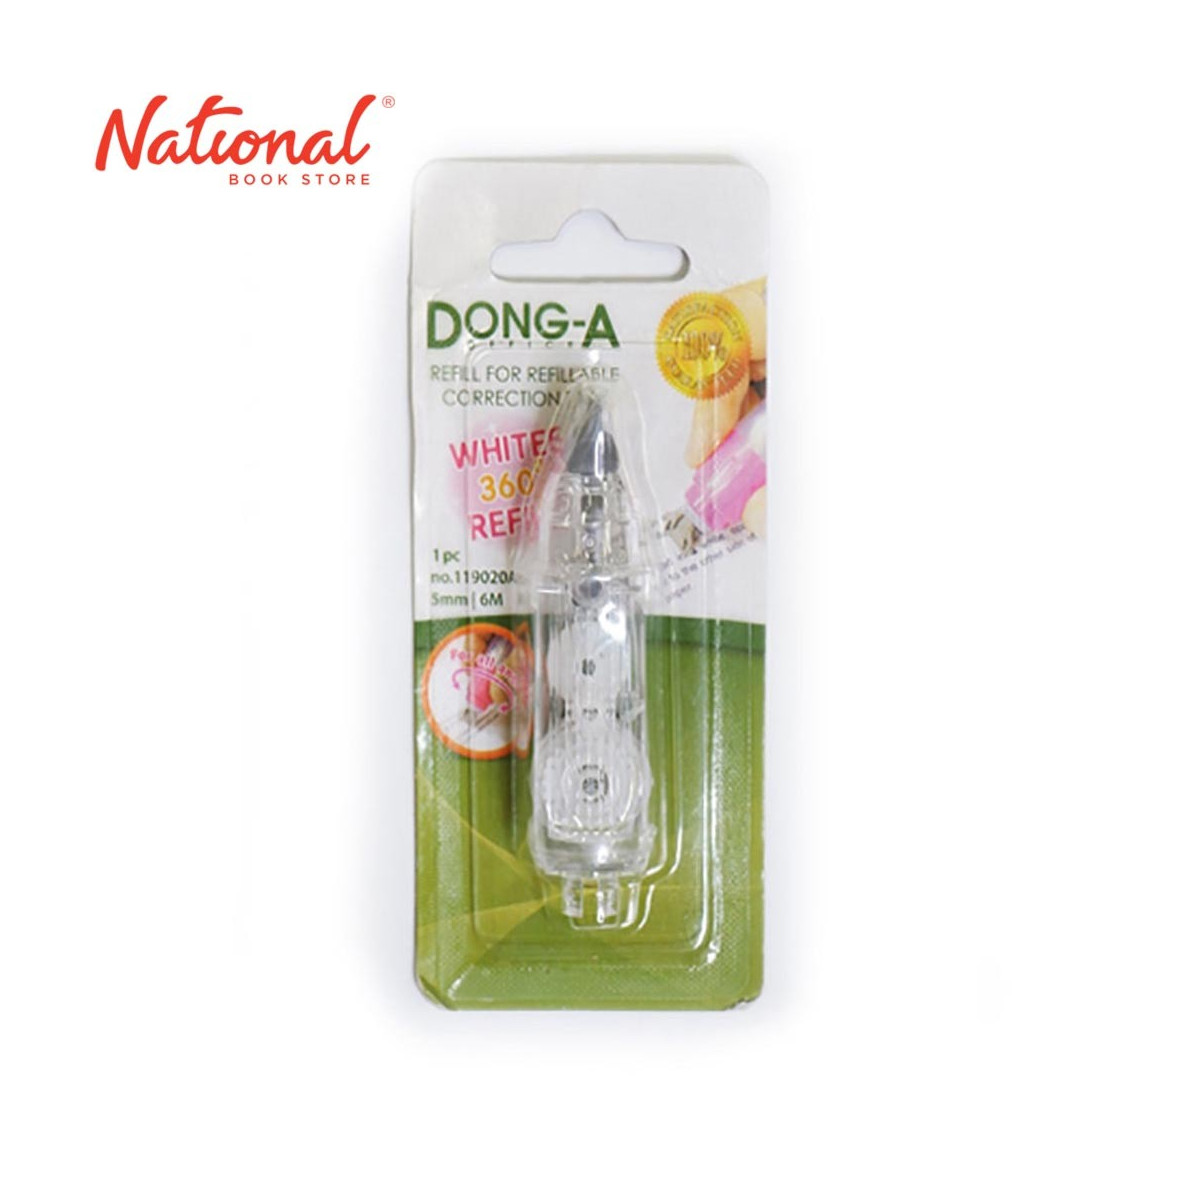 DONG-A CORRECTION TAPE REFILL 119020 5MMX6M